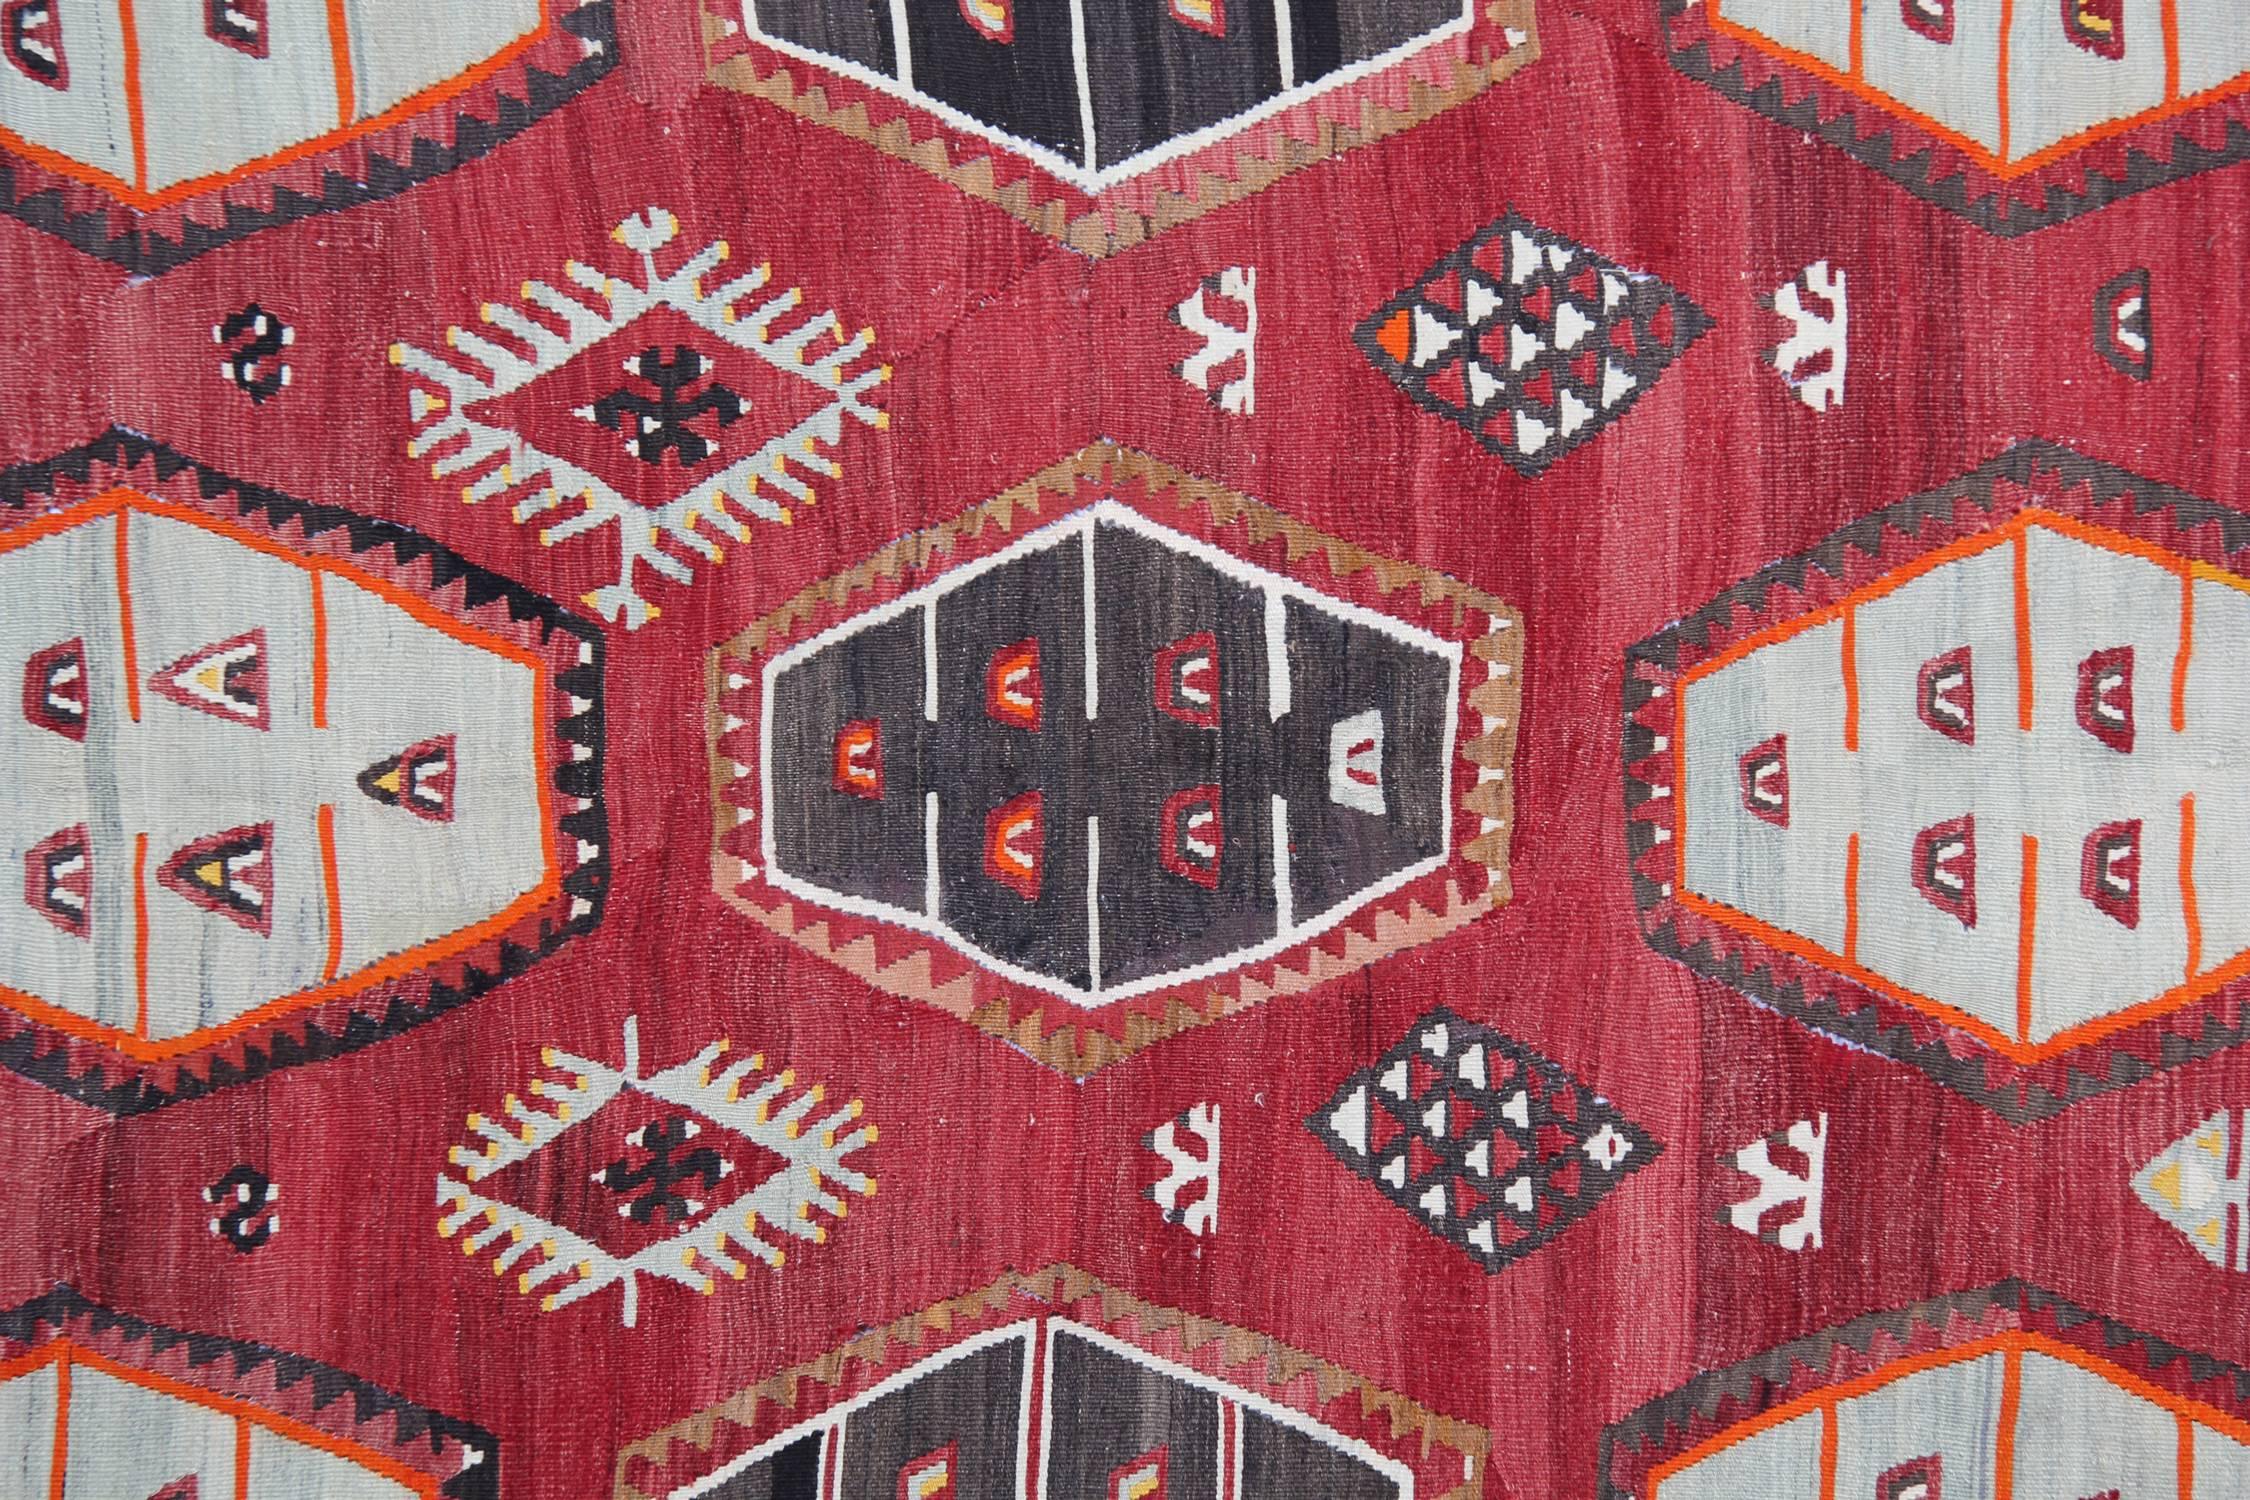 Hand-Woven Antique Rugs, Red Kilim Rugs Sarkisla Carpet Turkish Rugs for Sale For Sale